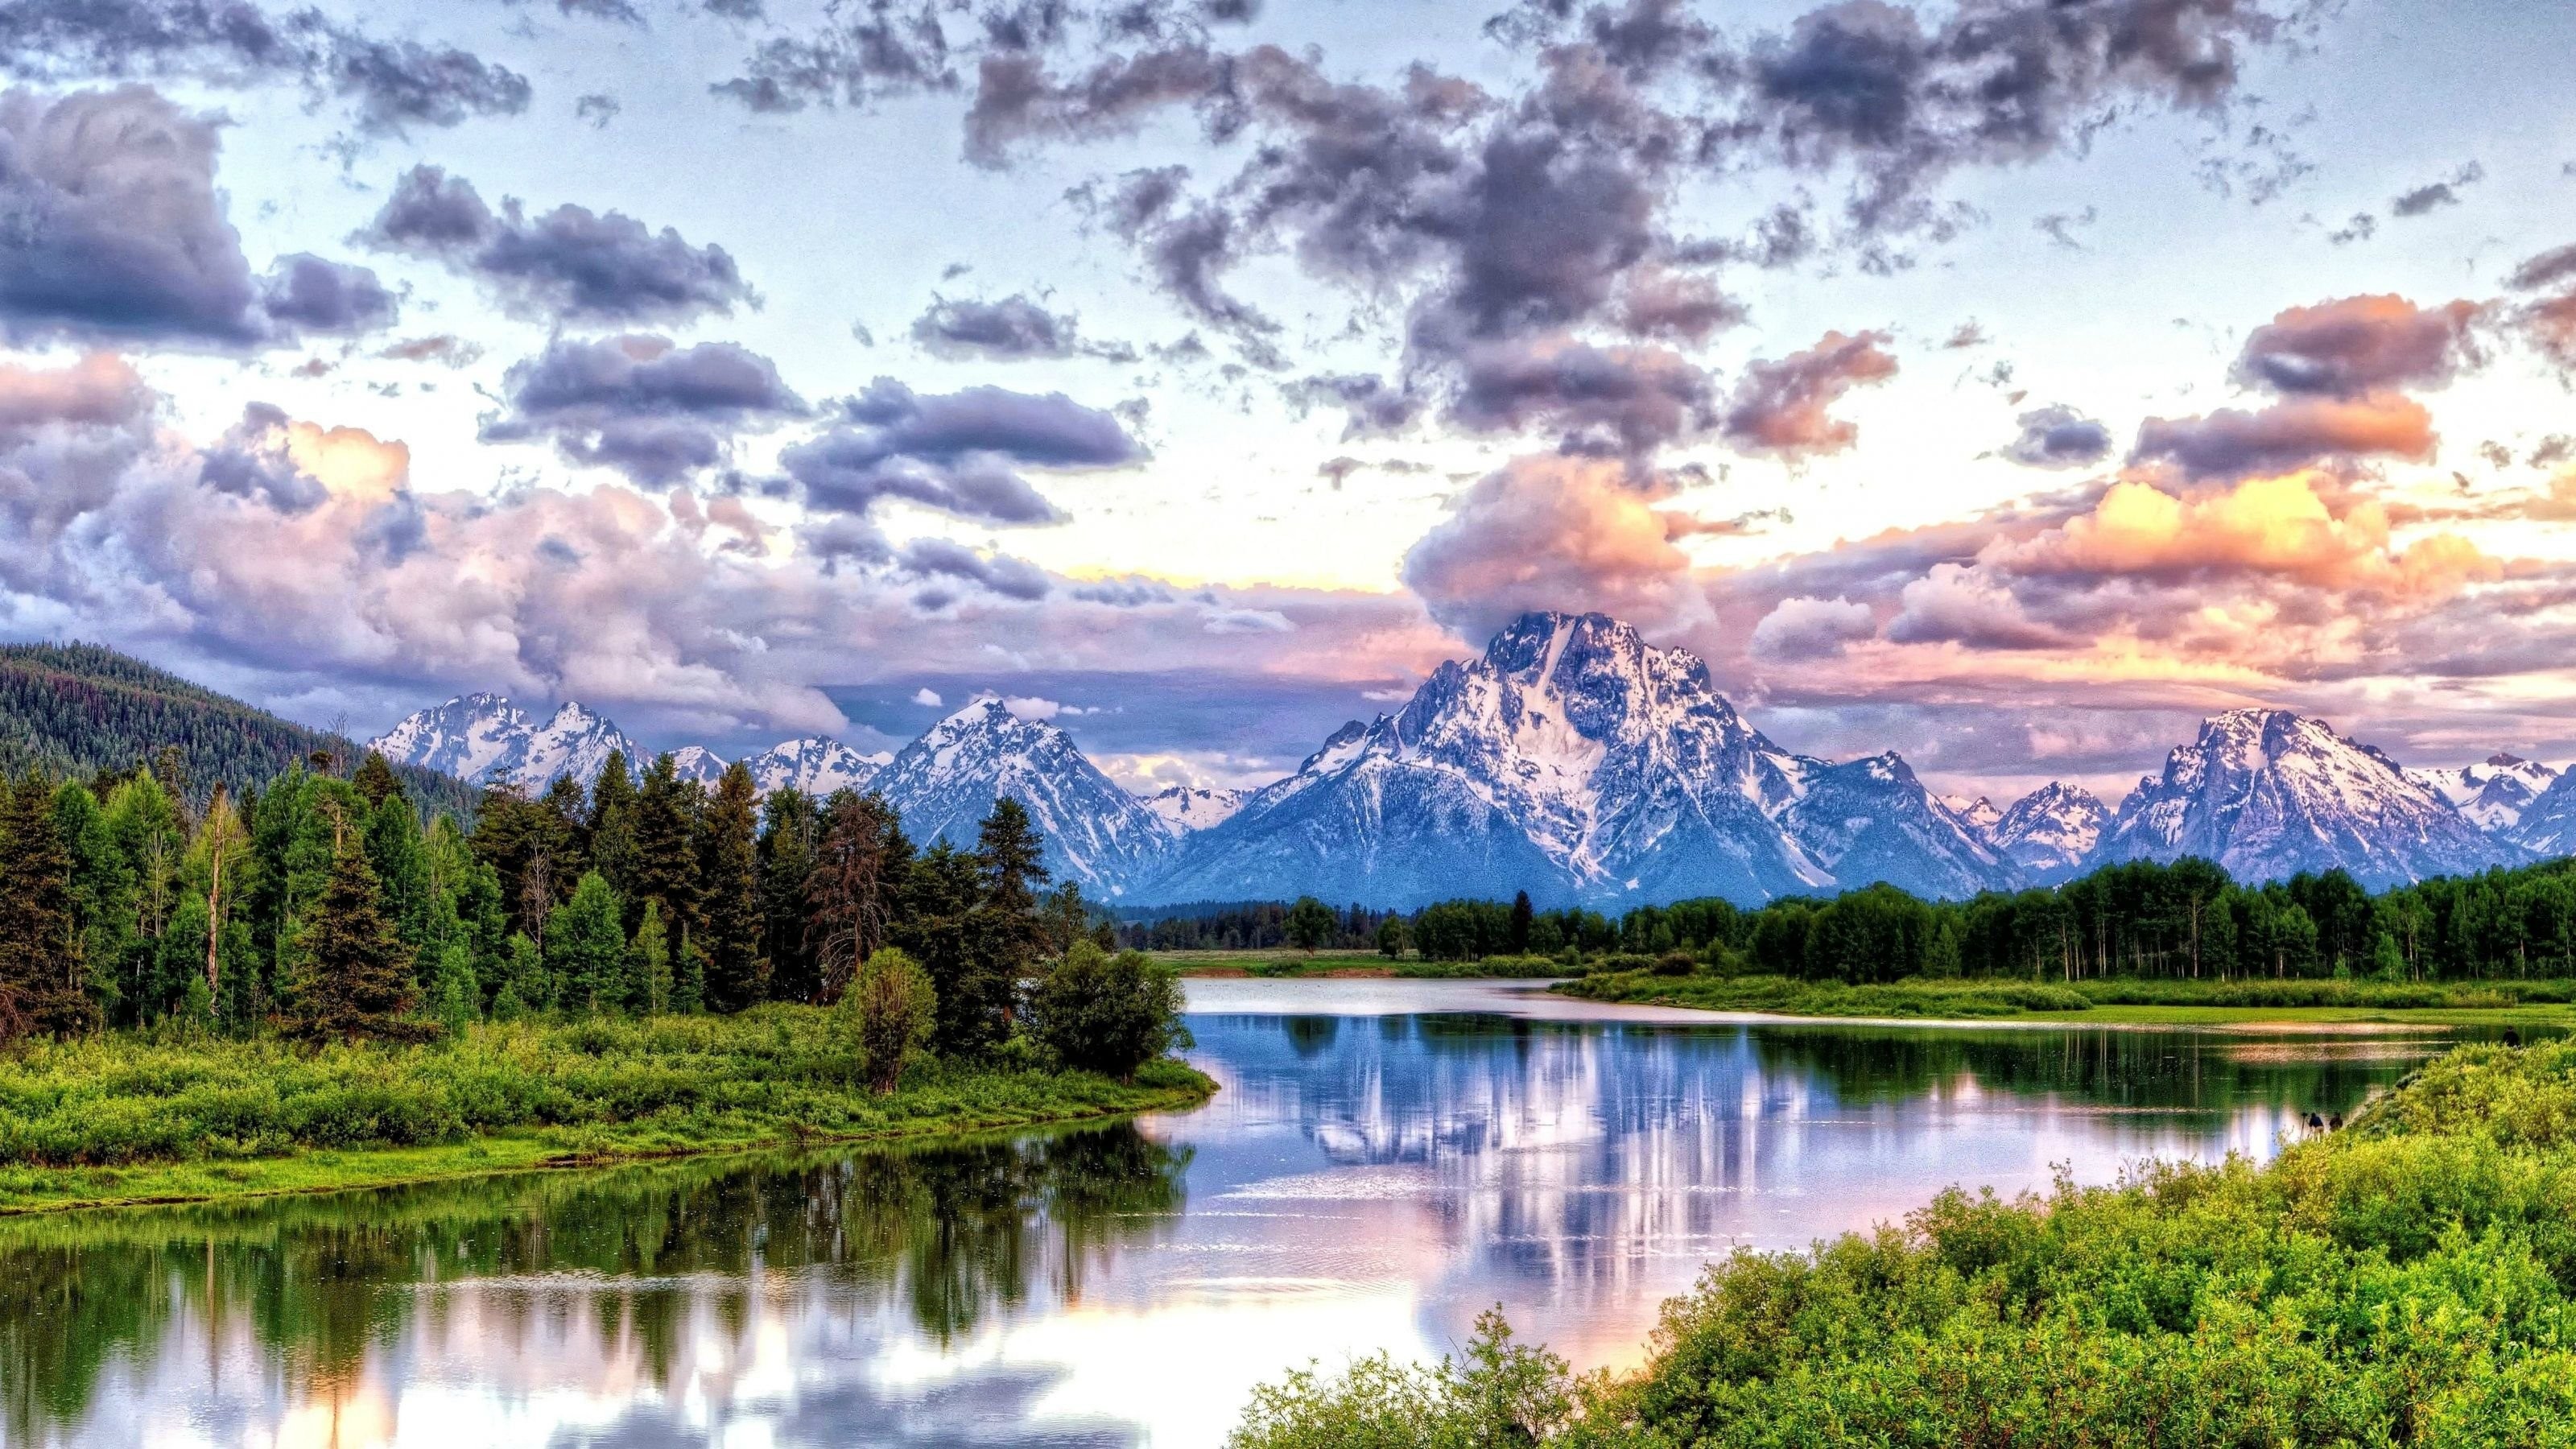 3200x1800 Oxbow Bend in Grand Teton National Park HD Wallpaper | Hintergrund |   | ID:683878 - Wallpaper Abyss